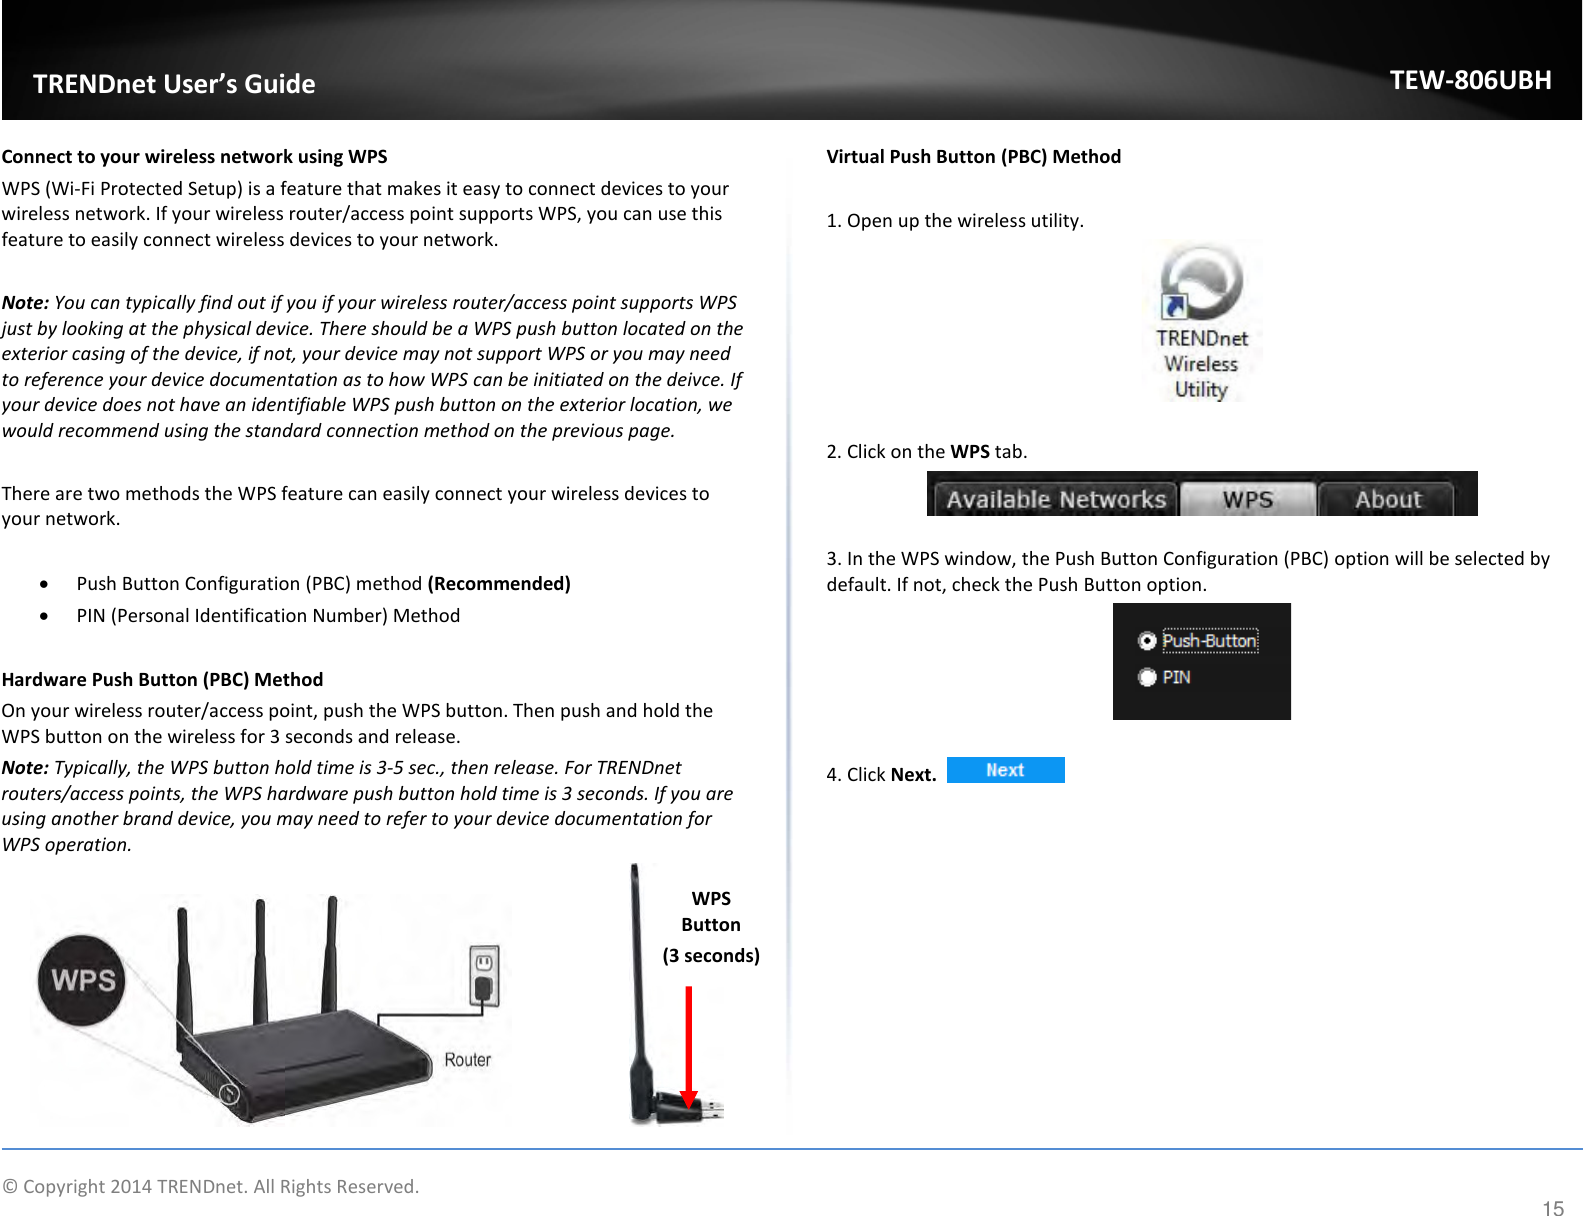              © Copyright 2014 TRENDnet. All Rights Reserved.       TRENDnet User’s Guide TEW-806UBH 15 Connect to your wireless network using WPS WPS (Wi-Fi Protected Setup) is a feature that makes it easy to connect devices to your wireless network. If your wireless router/access point supports WPS, you can use this feature to easily connect wireless devices to your network.   Note: You can typically find out if you if your wireless router/access point supports WPS just by looking at the physical device. There should be a WPS push button located on the exterior casing of the device, if not, your device may not support WPS or you may need to reference your device documentation as to how WPS can be initiated on the deivce. If your device does not have an identifiable WPS push button on the exterior location, we would recommend using the standard connection method on the previous page.  There are two methods the WPS feature can easily connect your wireless devices to your network.  • Push Button Configuration (PBC) method (Recommended) • PIN (Personal Identification Number) Method   Hardware Push Button (PBC) Method On your wireless router/access point, push the WPS button. Then push and hold the WPS button on the wireless for 3 seconds and release. Note: Typically, the WPS button hold time is 3-5 sec., then release. For TRENDnet routers/access points, the WPS hardware push button hold time is 3 seconds. If you are using another brand device, you may need to refer to your device documentation for WPS operation.      Virtual Push Button (PBC) Method  1. Open up the wireless utility.    2. Click on the WPS tab.   3. In the WPS window, the Push Button Configuration (PBC) option will be selected by default. If not, check the Push Button option.   4. Click Next.     WPS Button (3 seconds) 